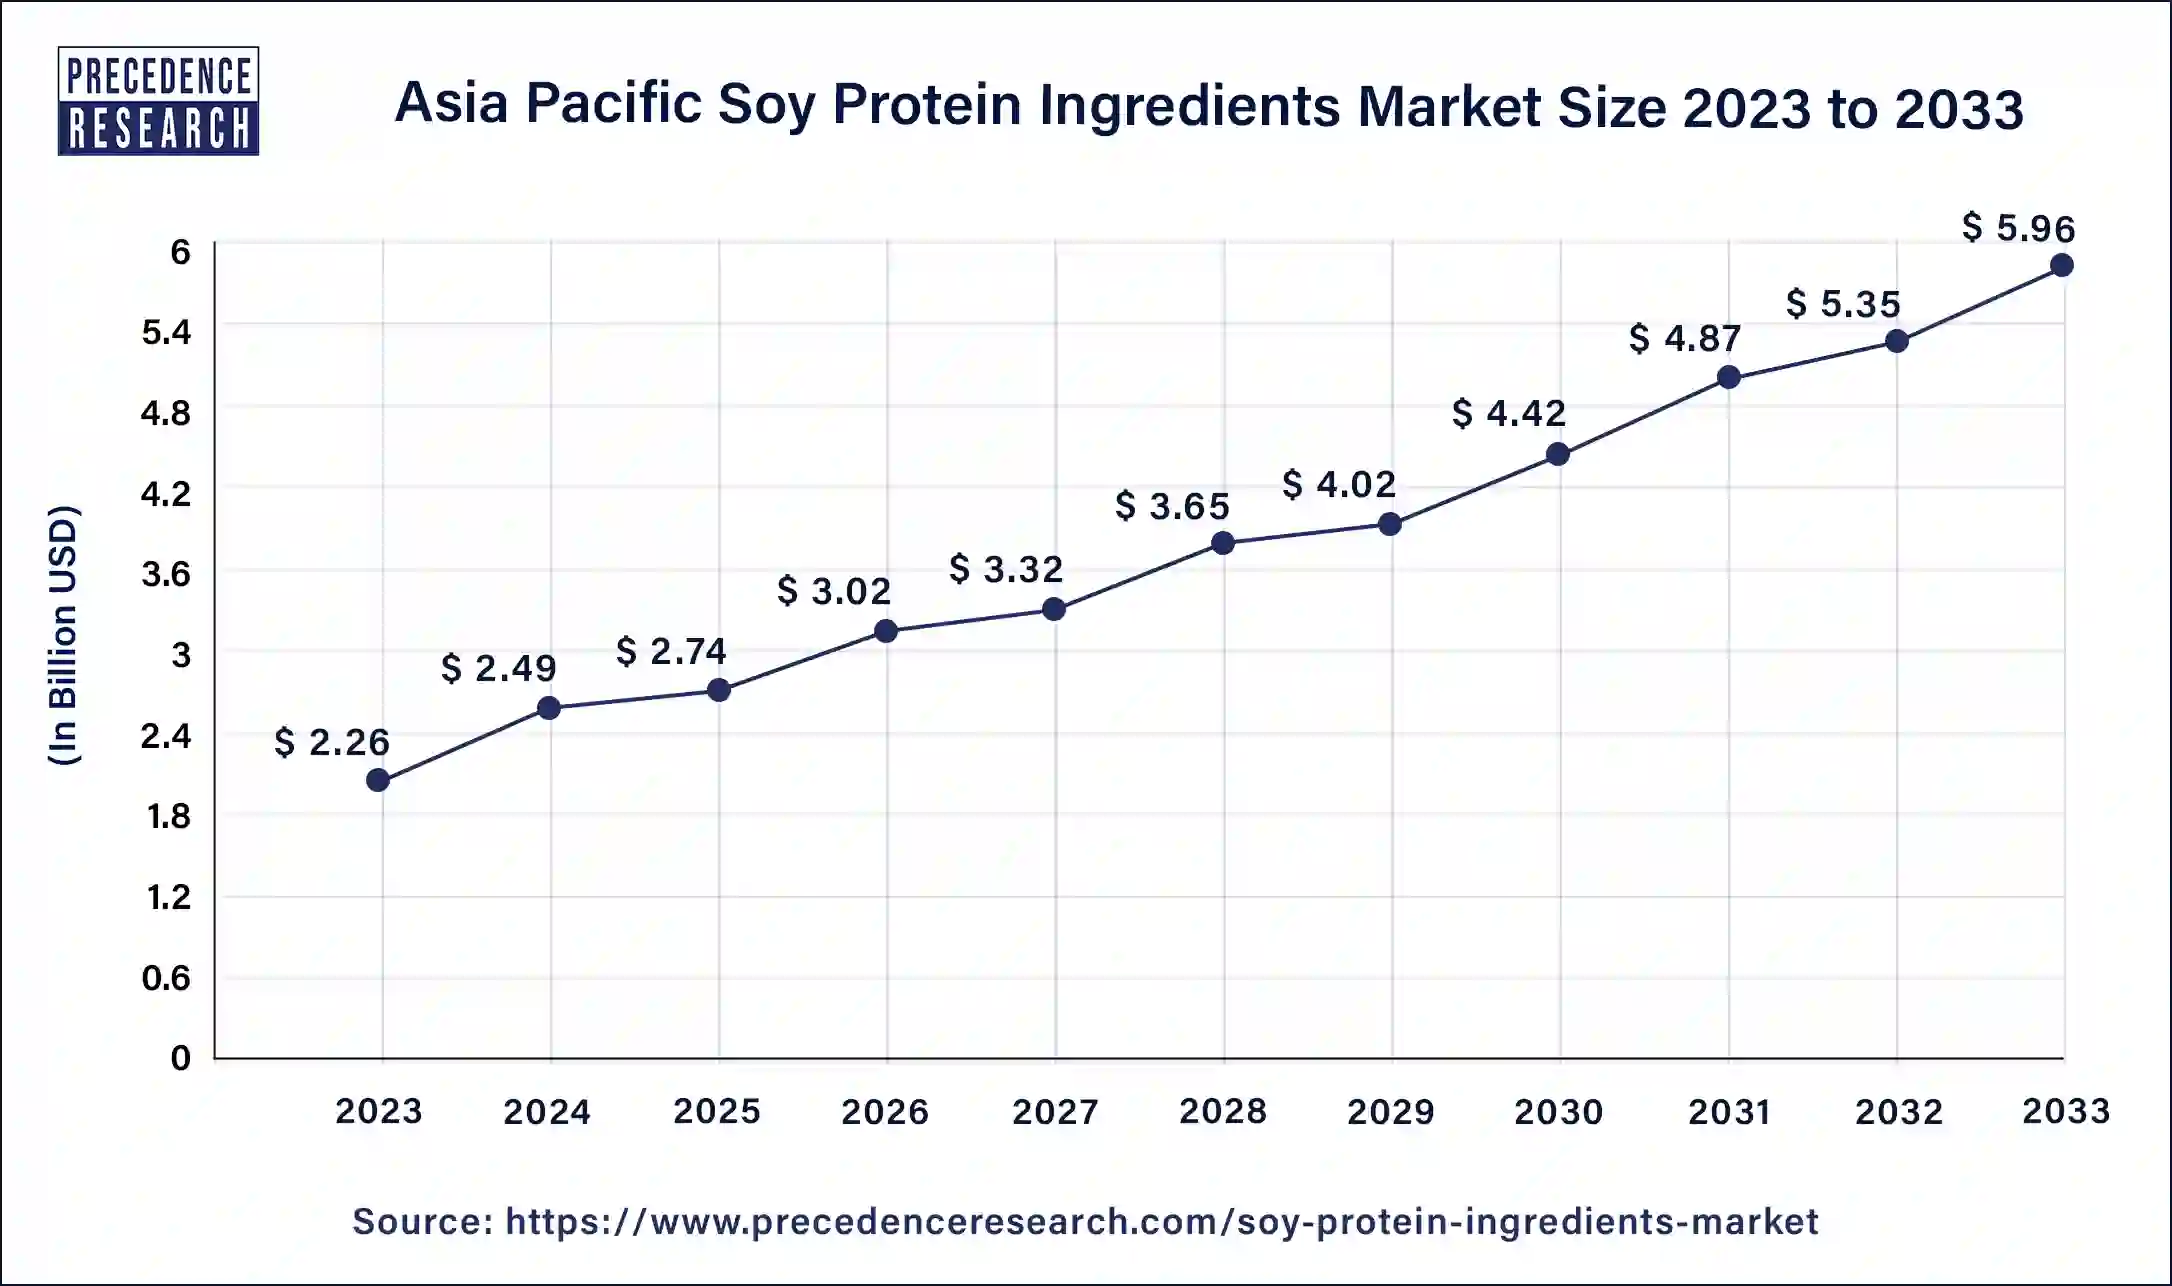 Asia Pacific Soy Protein Ingredients Market Size 2024 to 2033